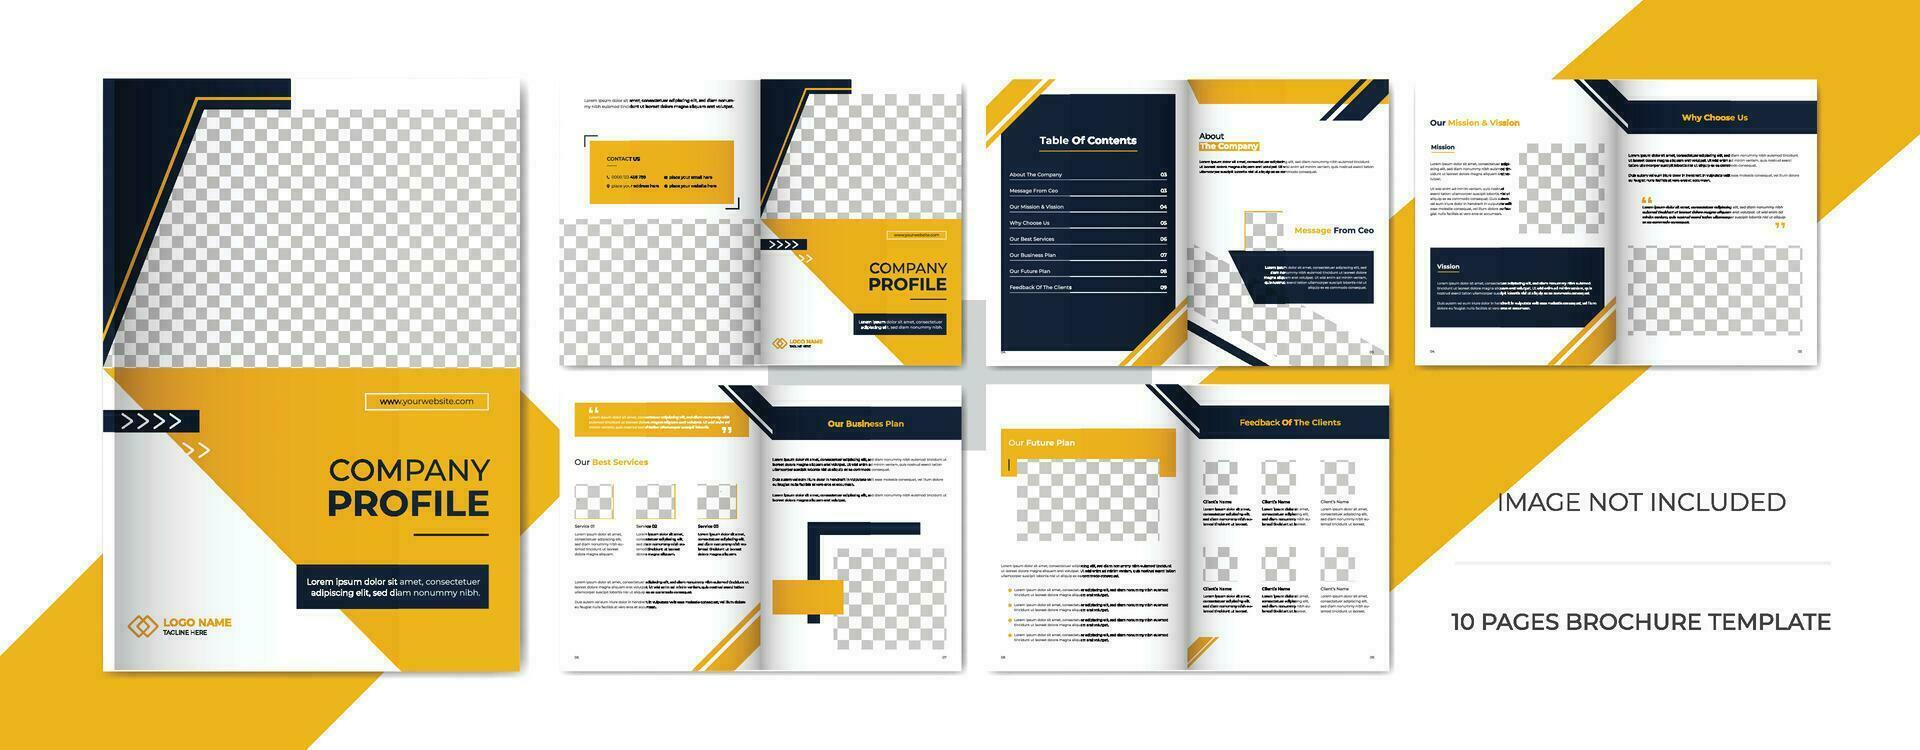 Corporate company profile template, business brochure design, annual report or business proposal vector template